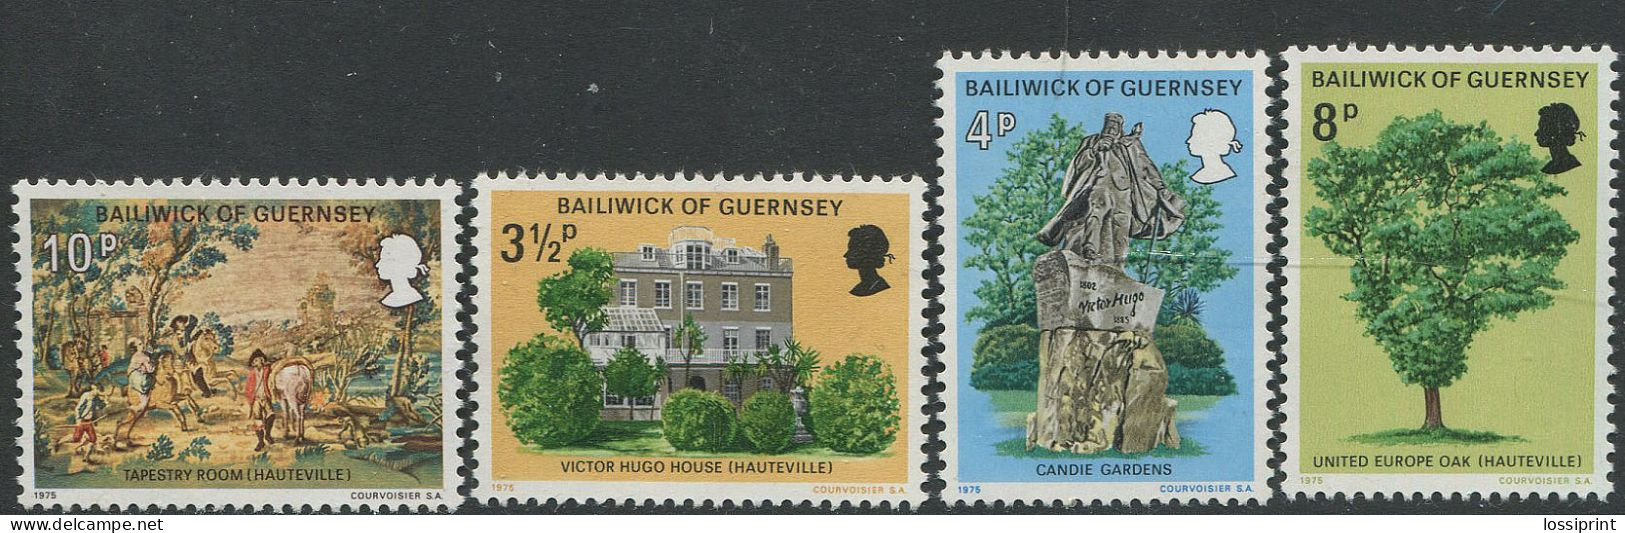 Bailiwick Of Guernsey:Unused Stamps Serie Writer Victor Hugo Exile In Guernsey, 1975, MNH - Guernesey